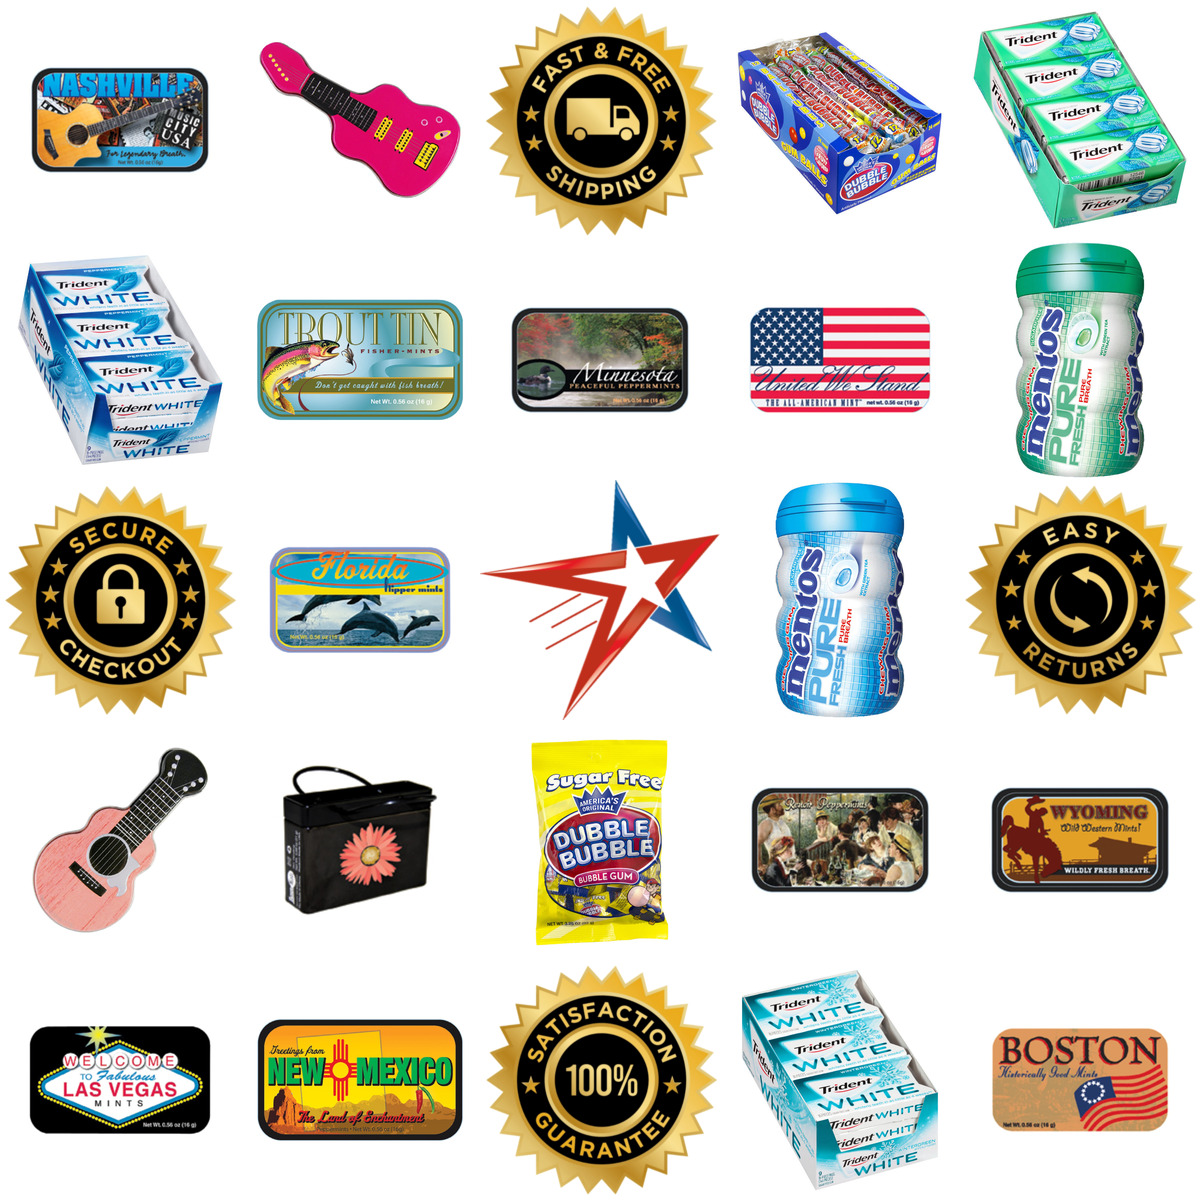 A selection of Gum and Mints products on GoVets